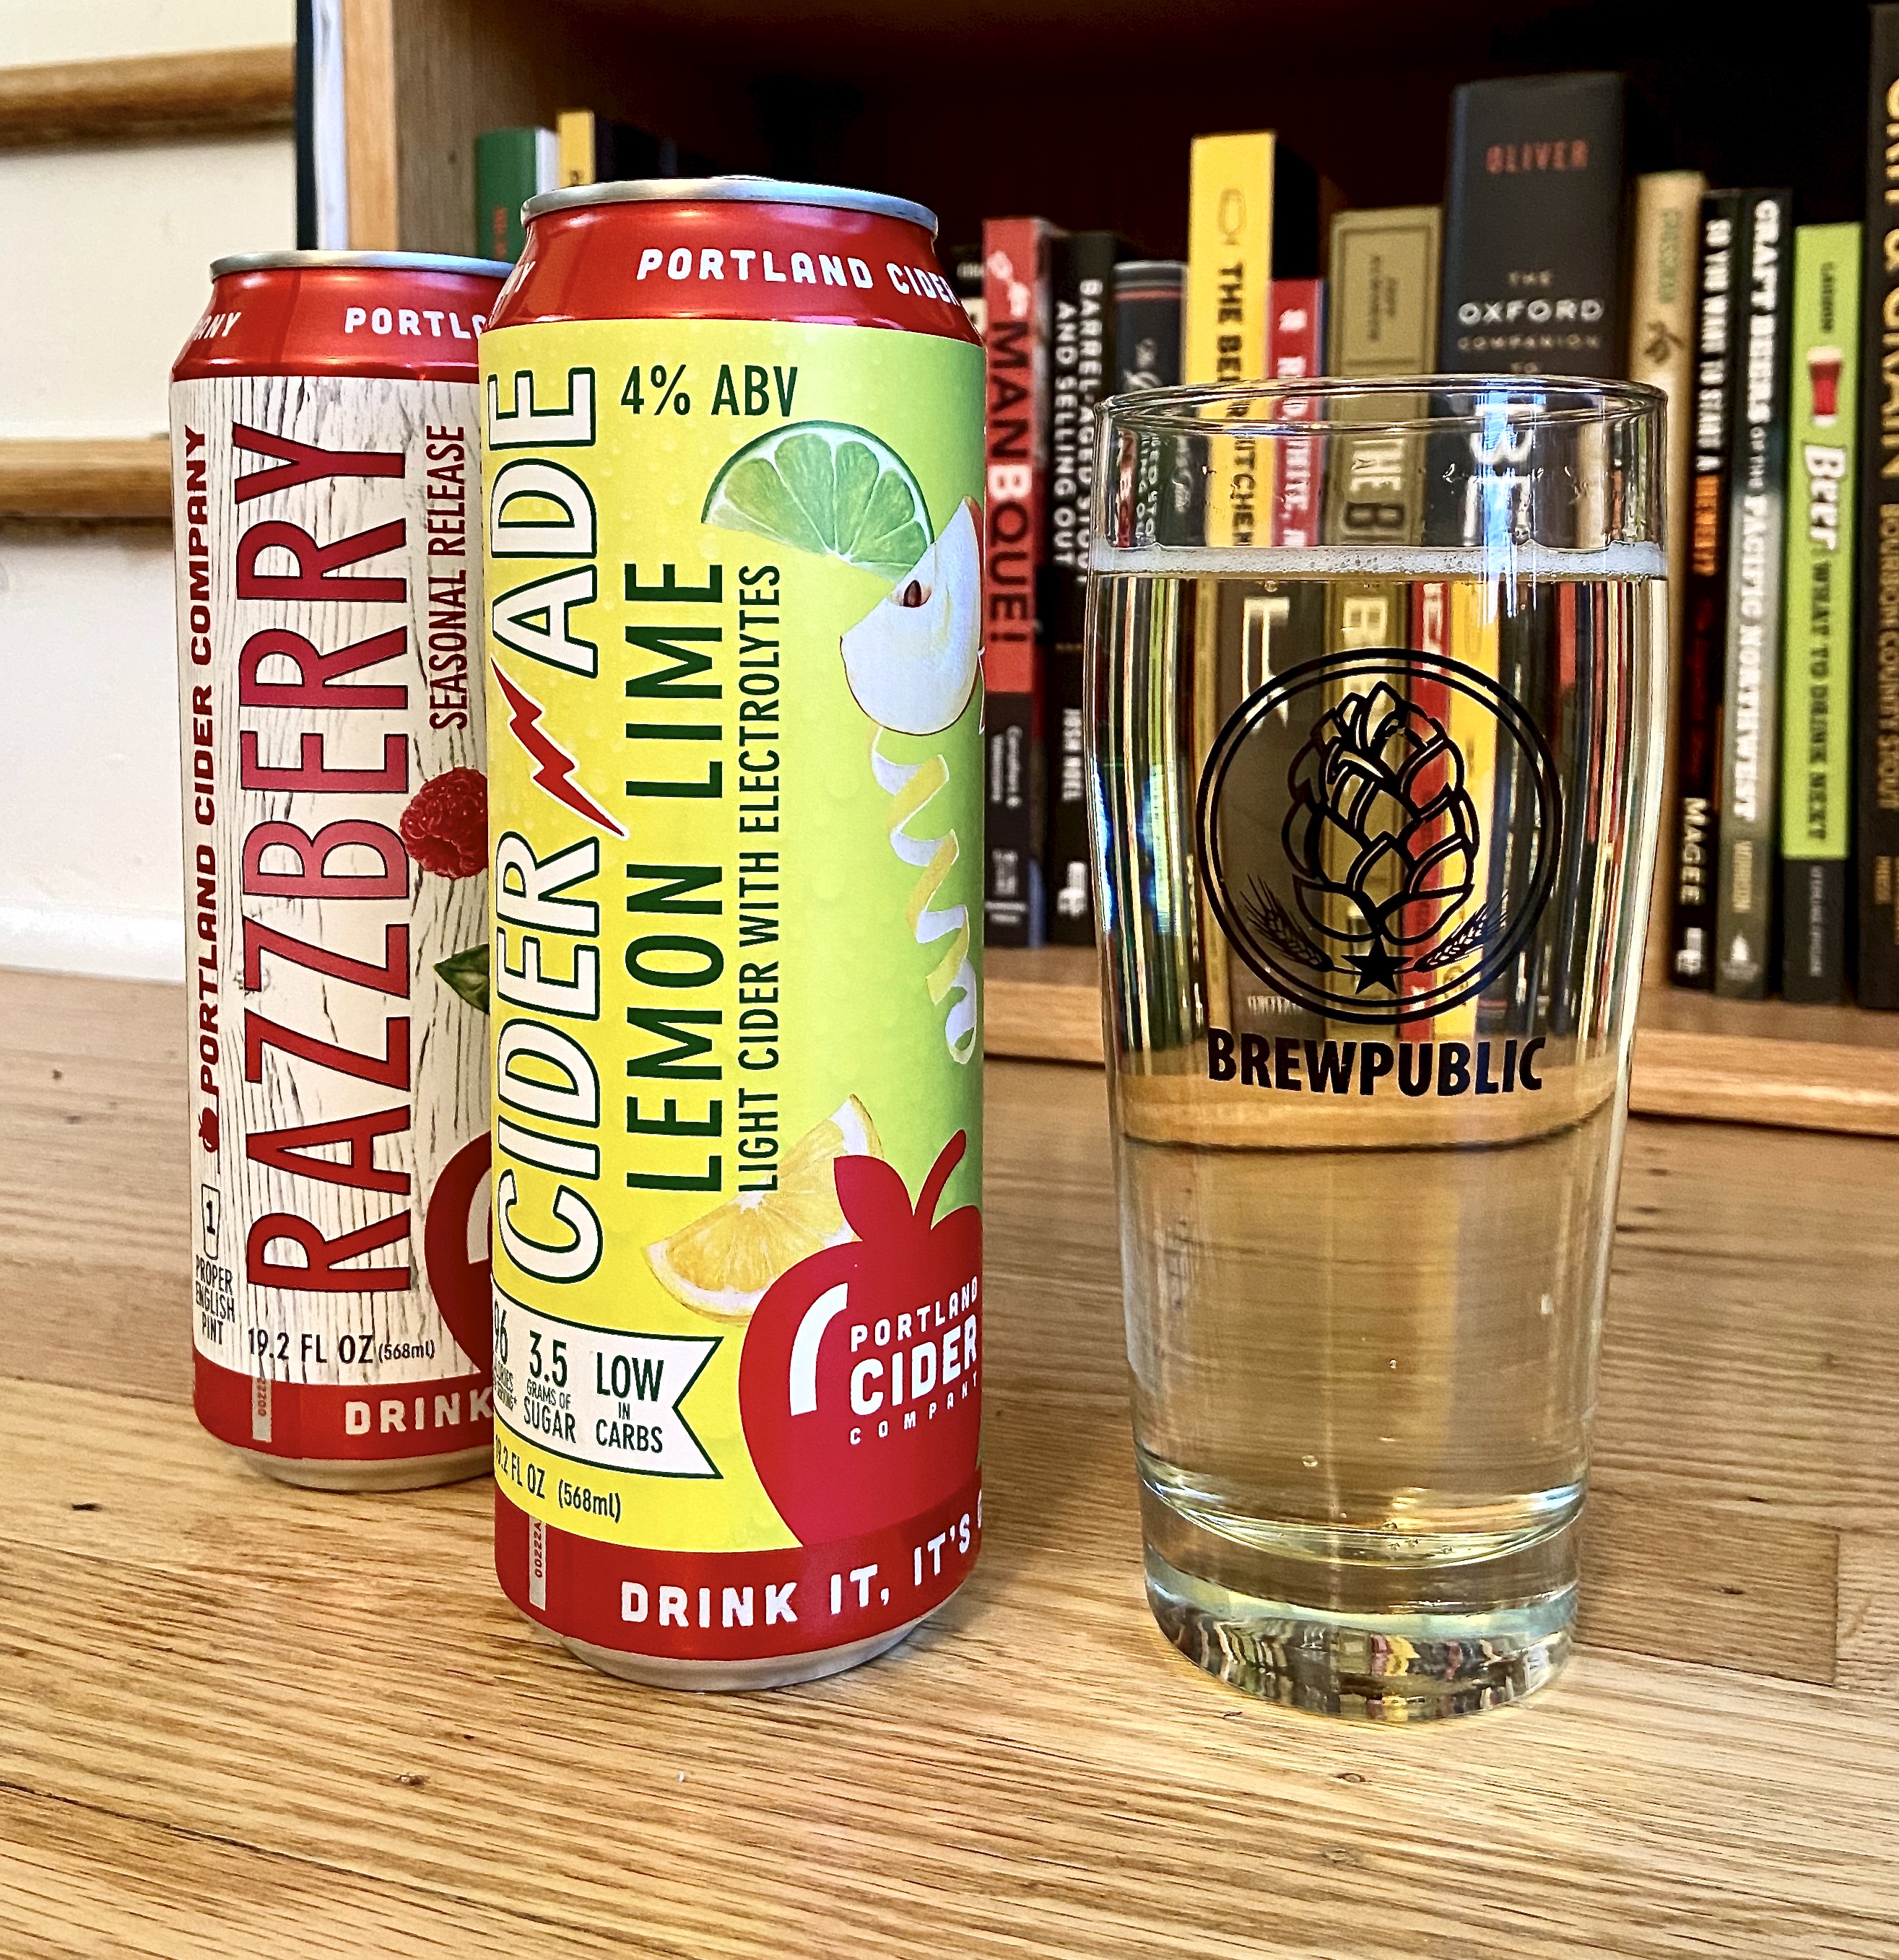 Portland Cider Co. has released a low calorie and low carb cider with its new Ciderade.